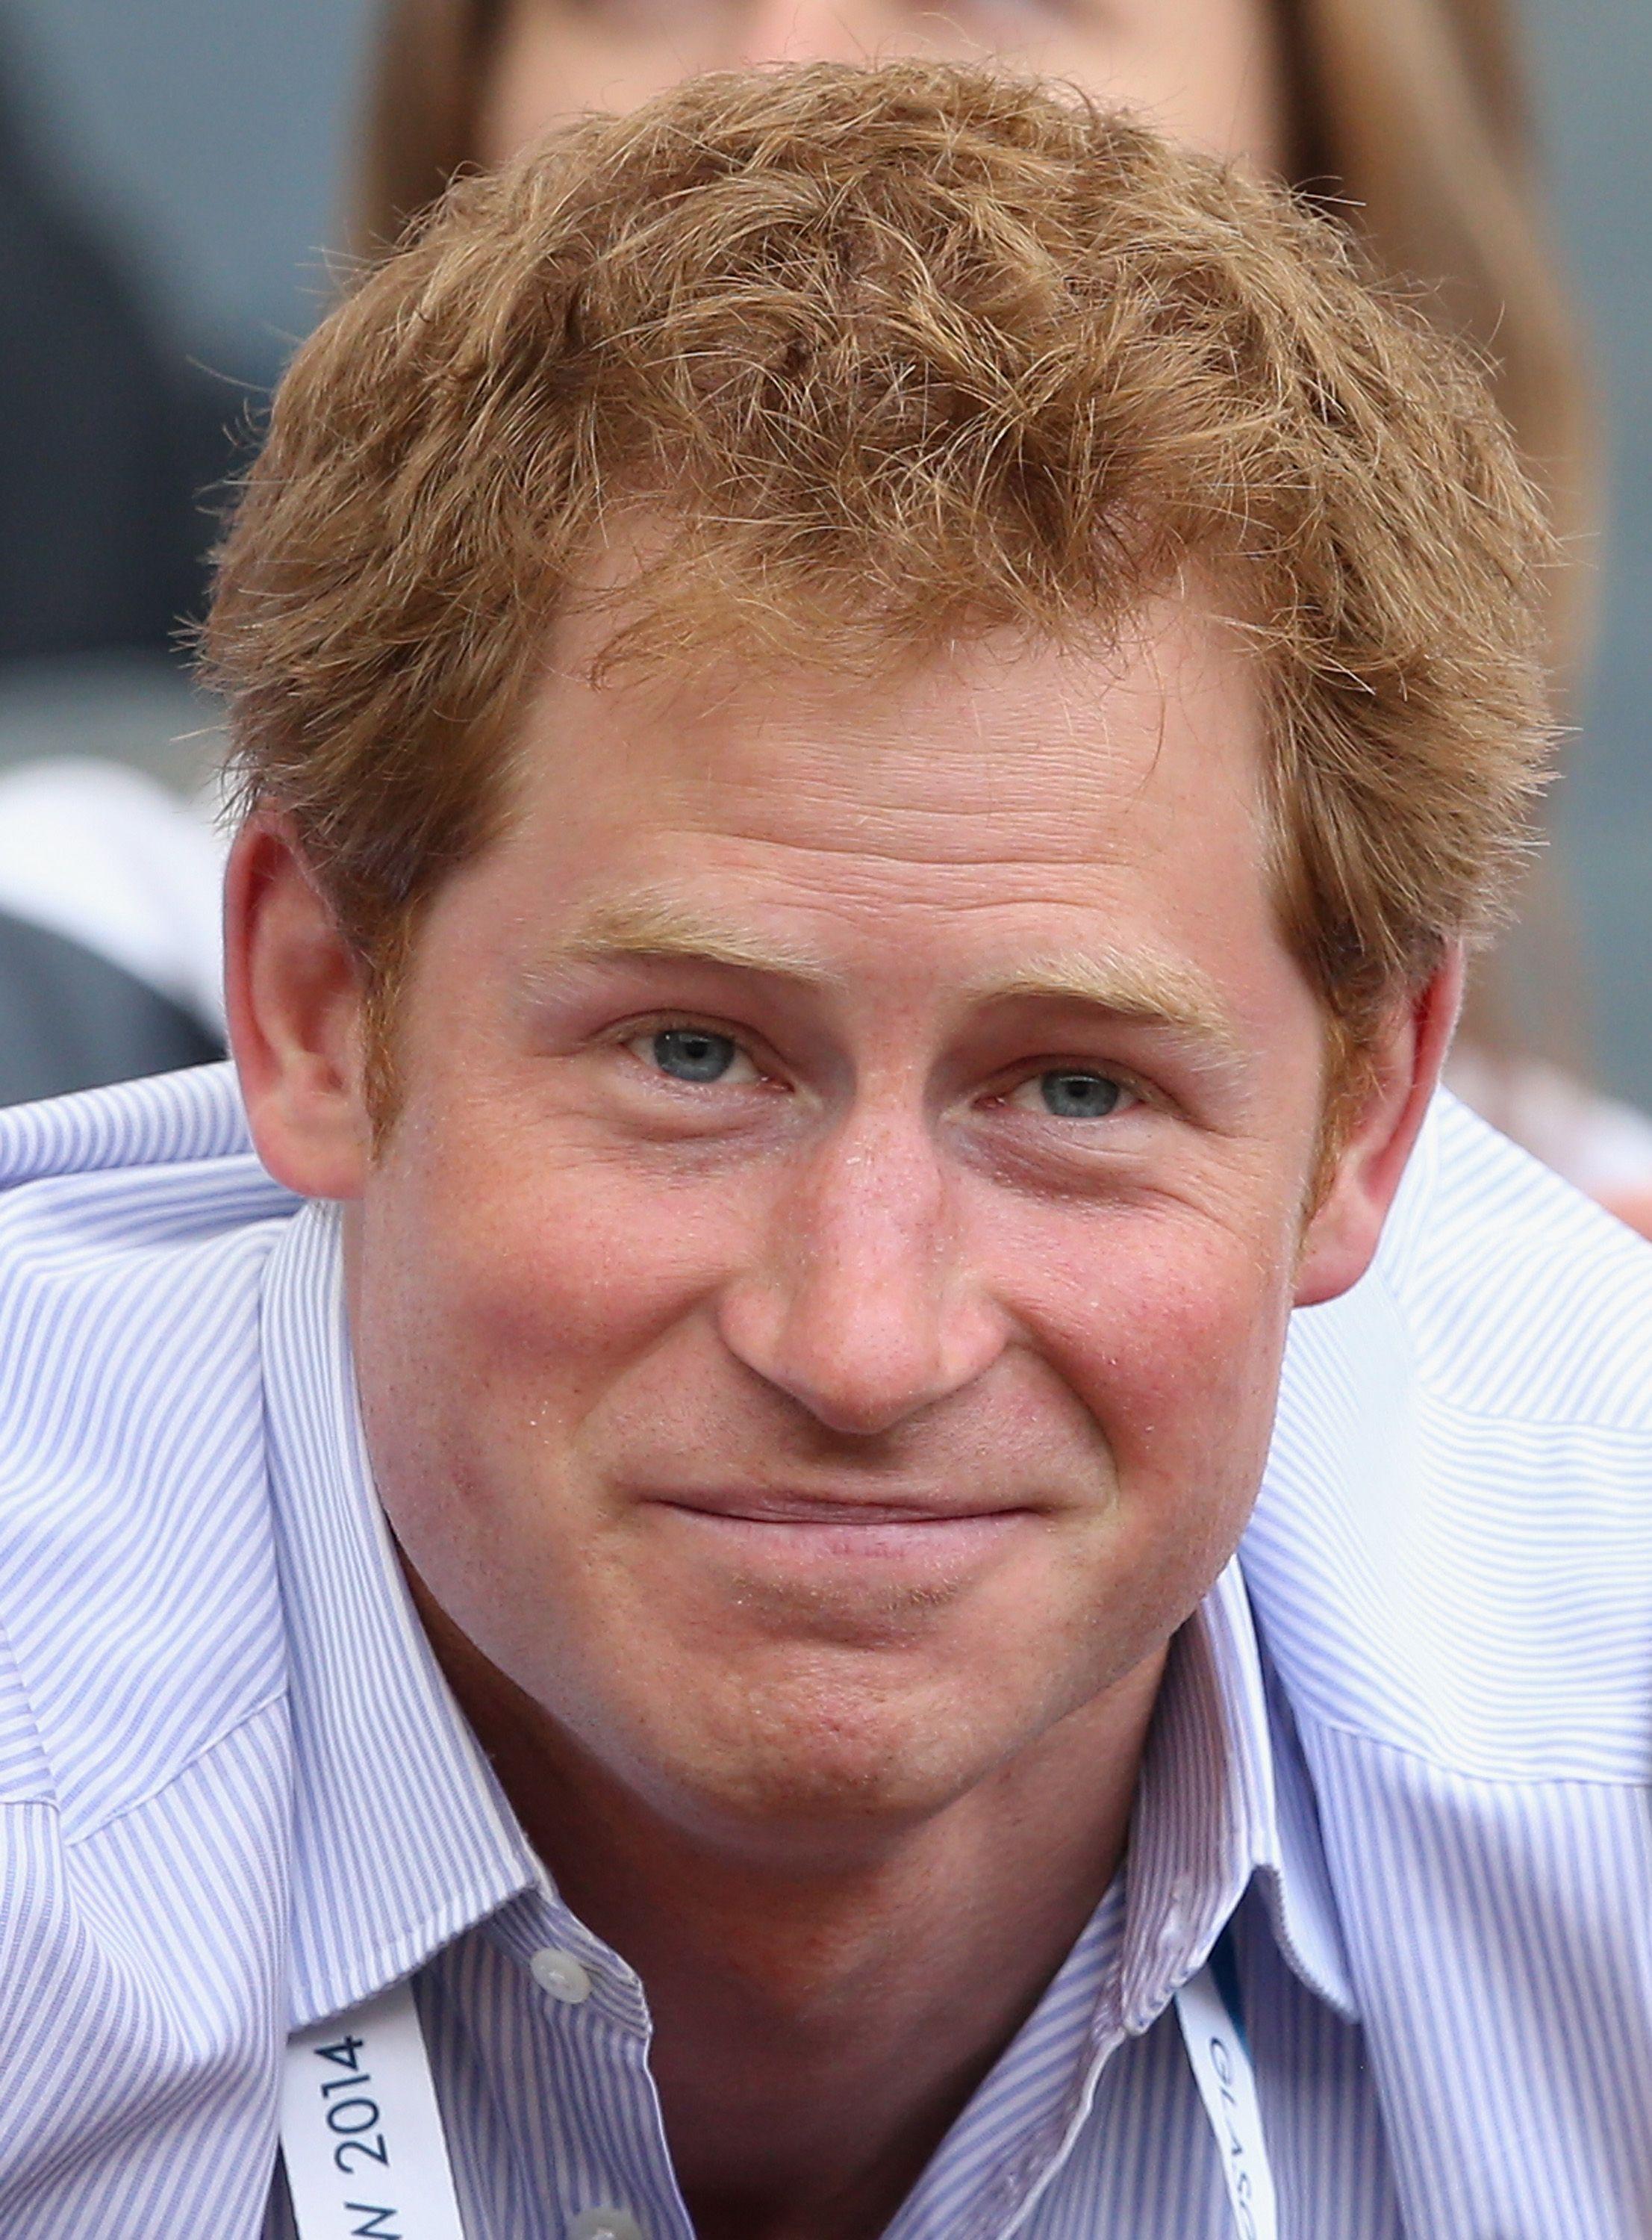 Wallpaper Of The Day: Prince Harryx3000px Prince Harry Image